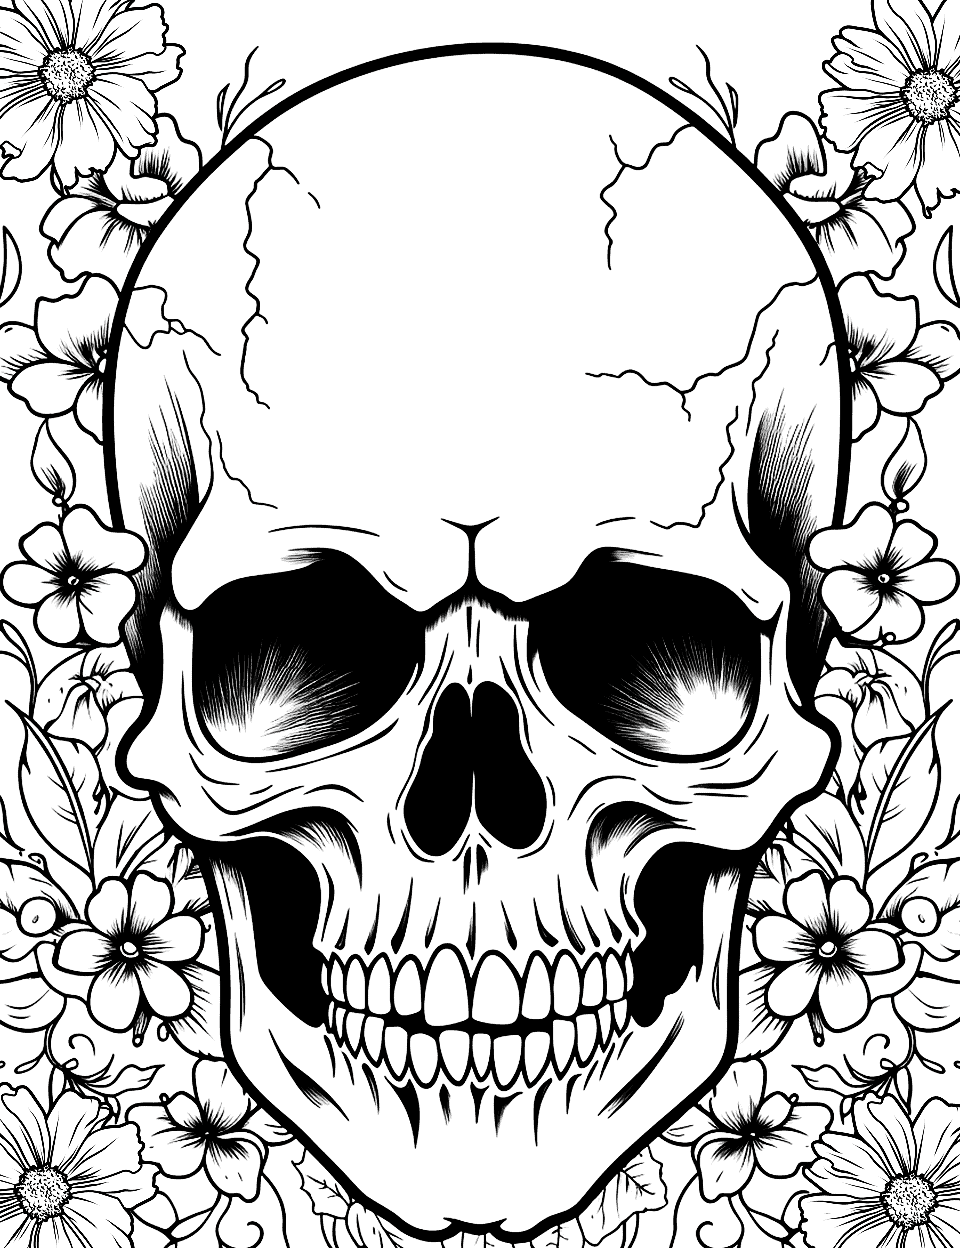 Garden Guardian Skull Coloring Page - A skull sitting with plants and flowers in a lush garden.